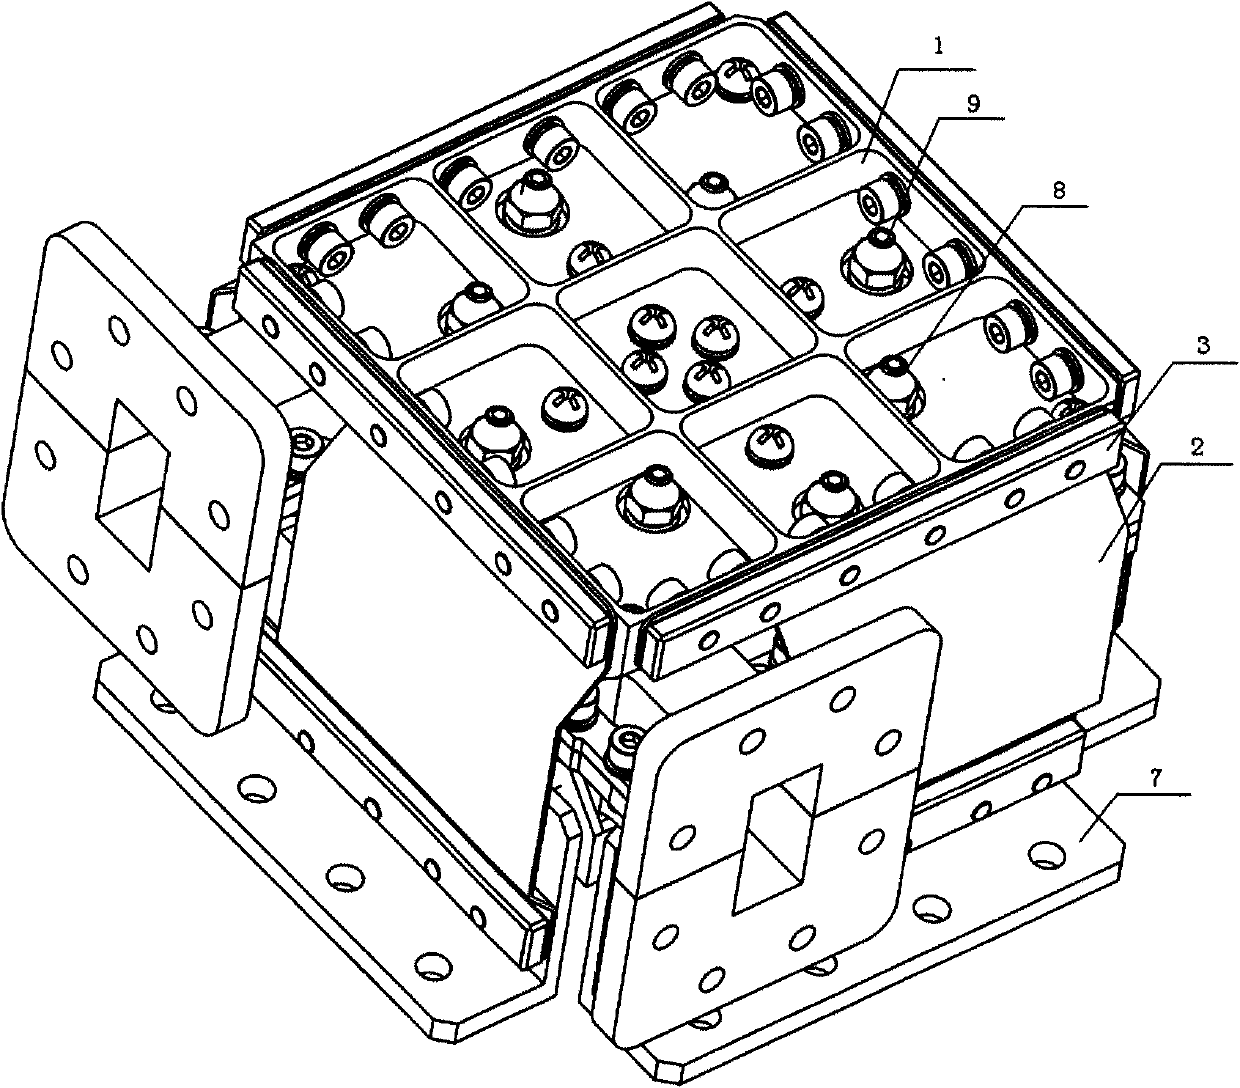 High-power corner cut filter with square cavity